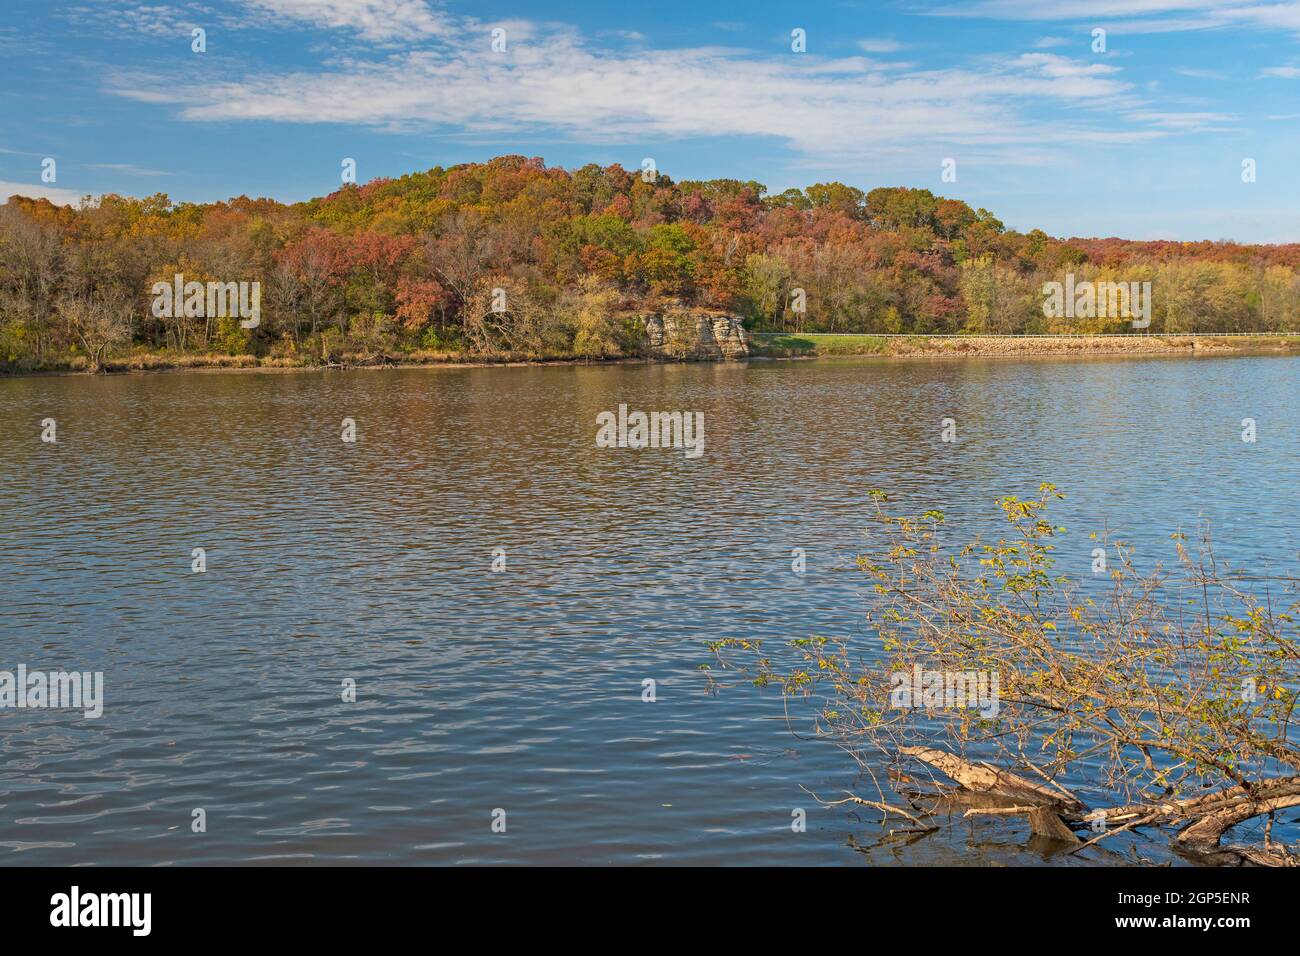 Looking Across a River at the Fall Colors at Lowden Miller State Forest in Illinois Stock Photo